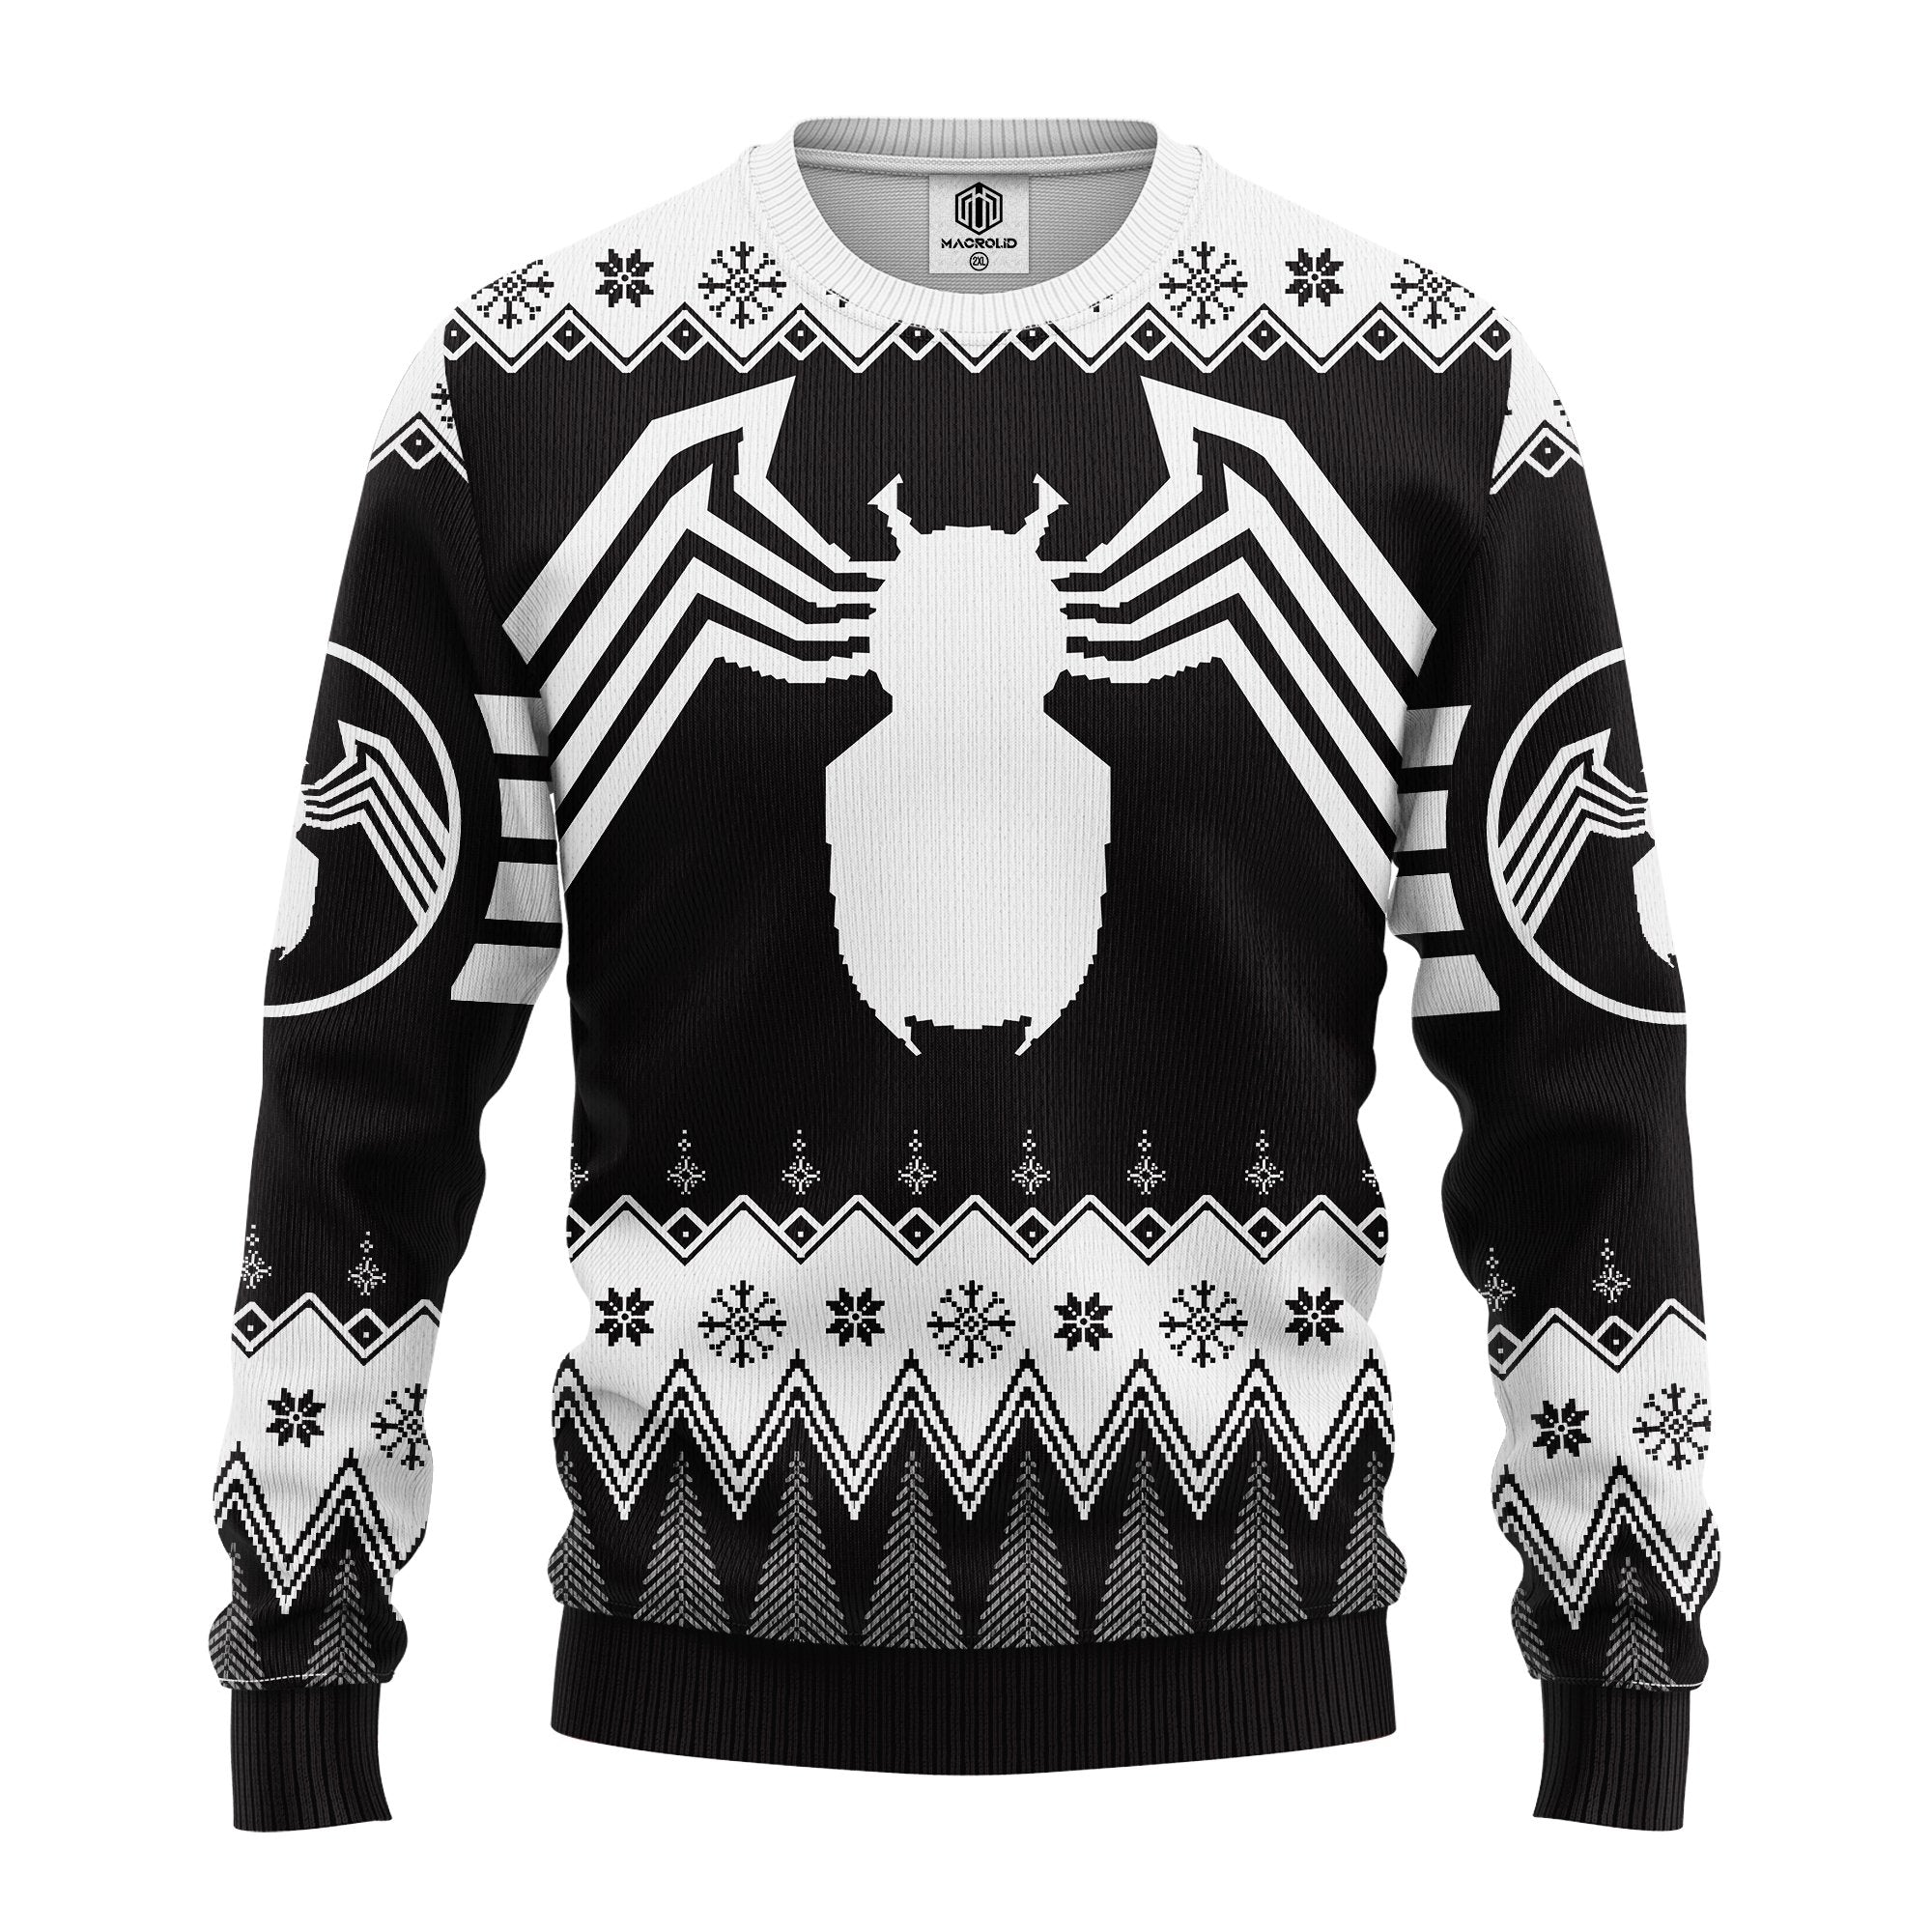 Spider Man Black Ugly Christmas Sweater Amazing Gift Idea Thanksgiving Gift